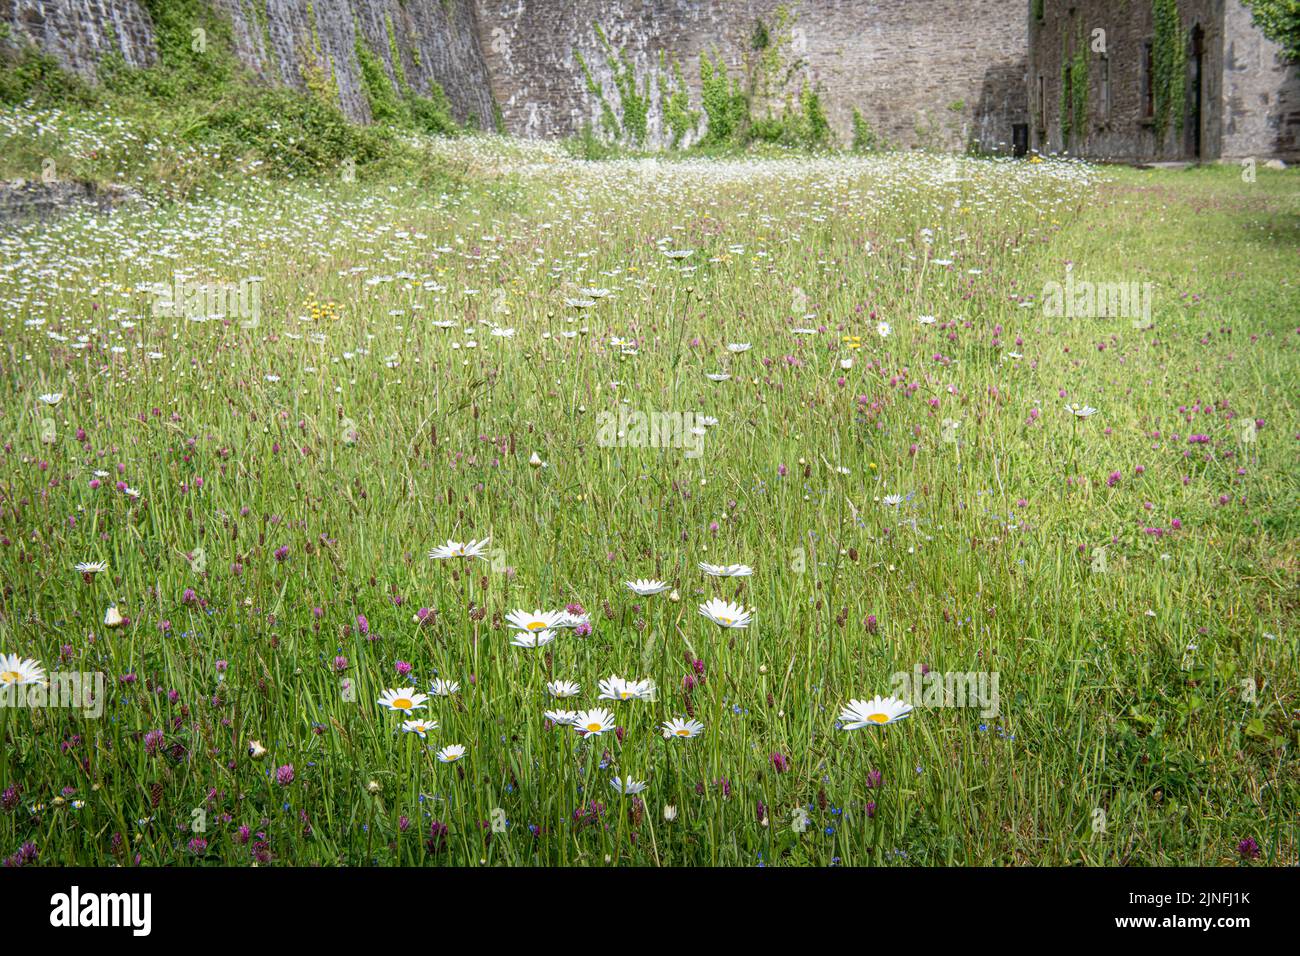 Flower meadow growing inside an exercise area of Cork City Gaol, Cork, Ireland Stock Photo